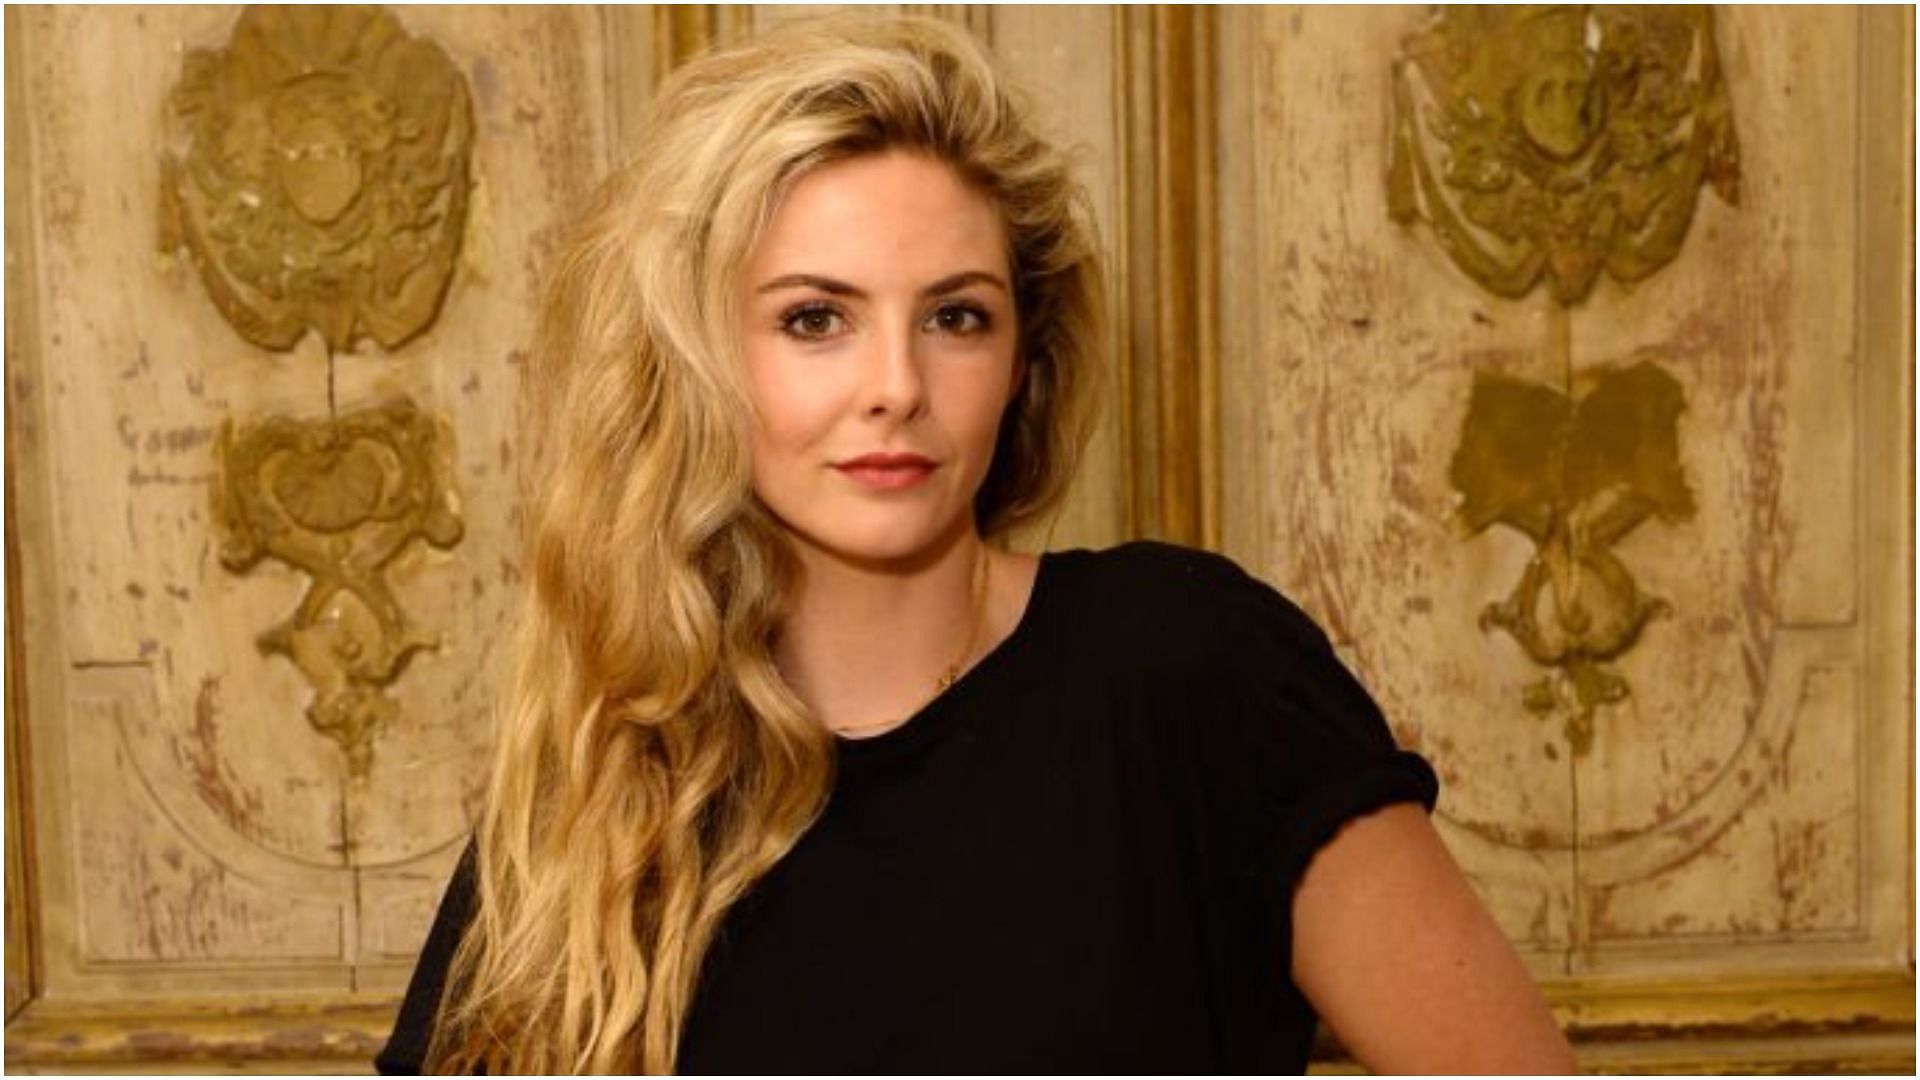 Tamsin Egerton is a popular actress known for her roles in films and television (Image via Eammon M. McCormack/Getty Images)